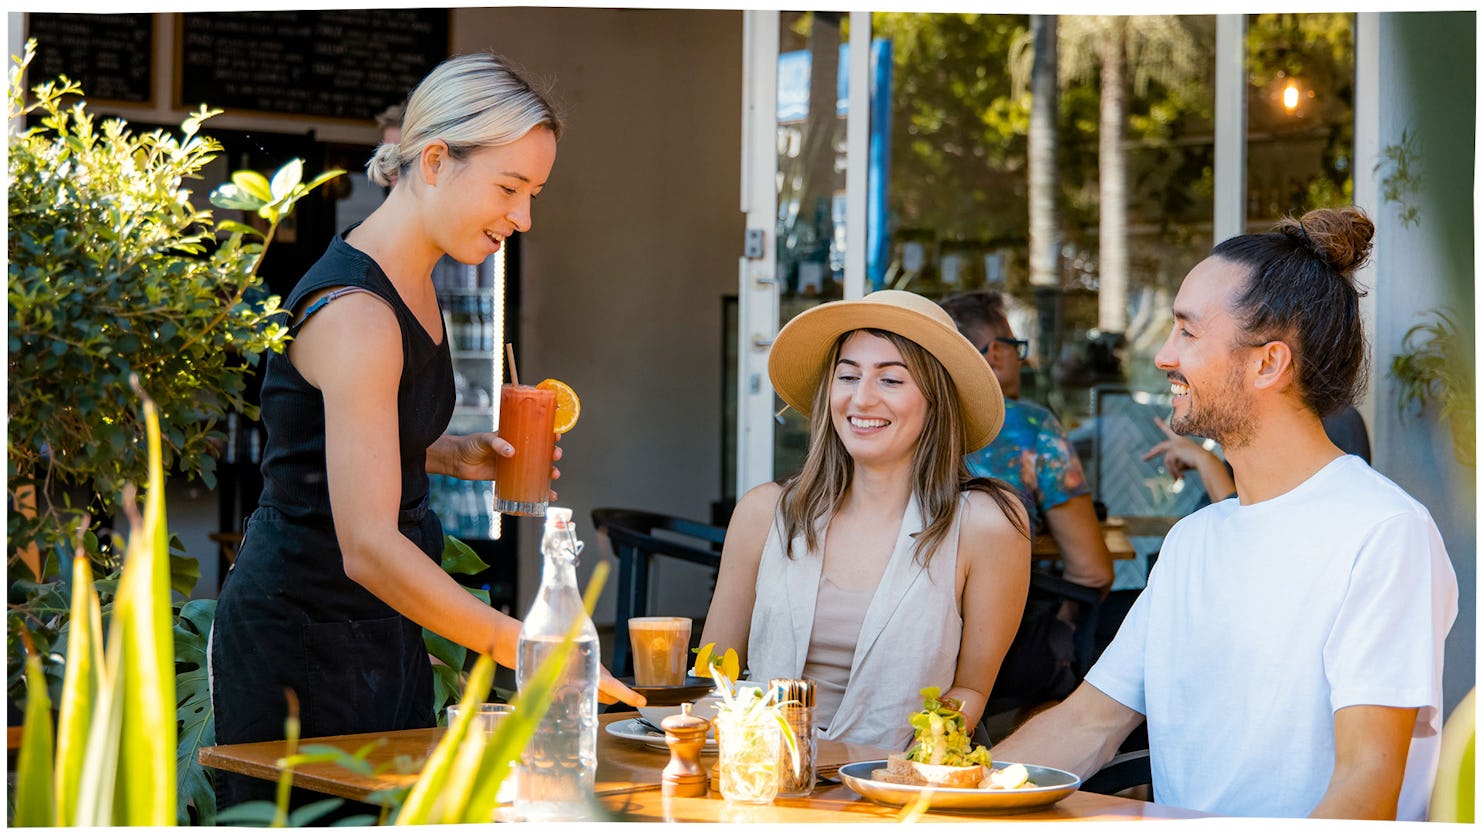 Where to eat, drink and feel merry in Coolum